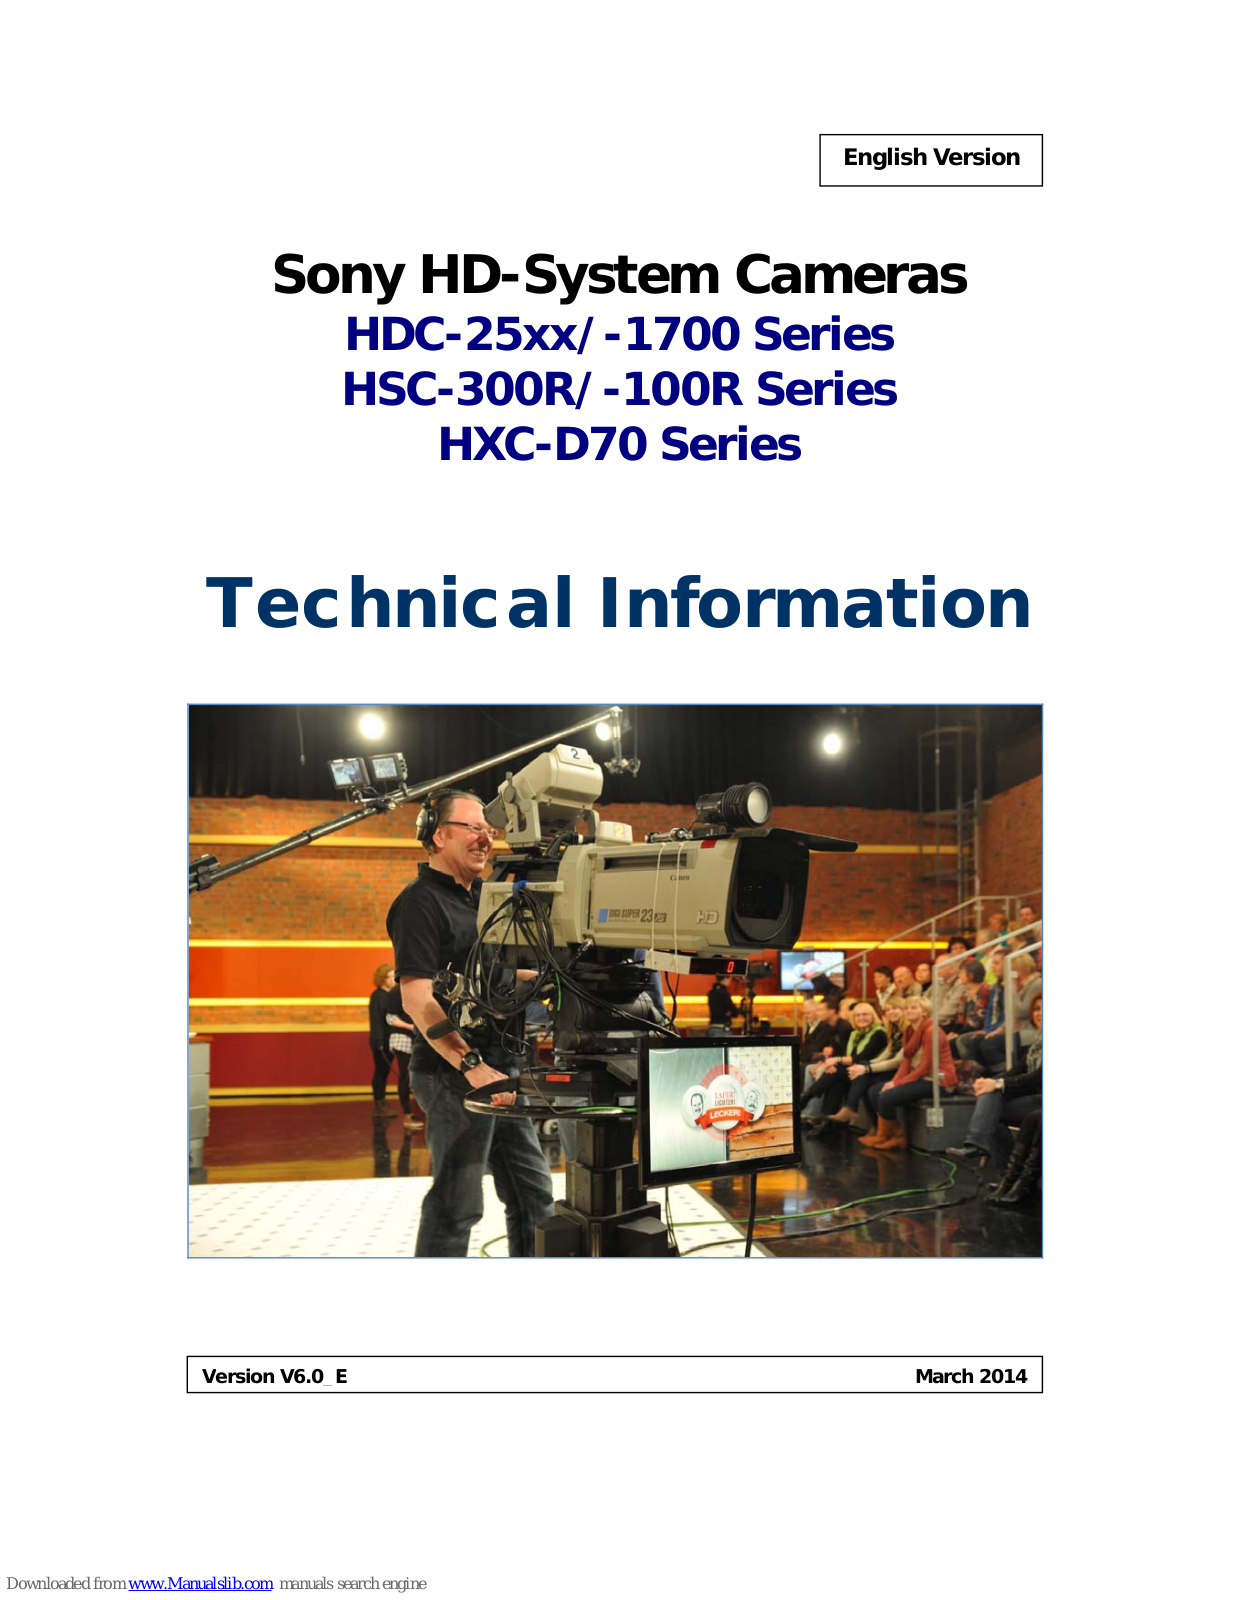 Sony HDC-25 Series, HDC‐1700, HSC‐100R, HSC‐300R, HXC‐D70 Technical Information